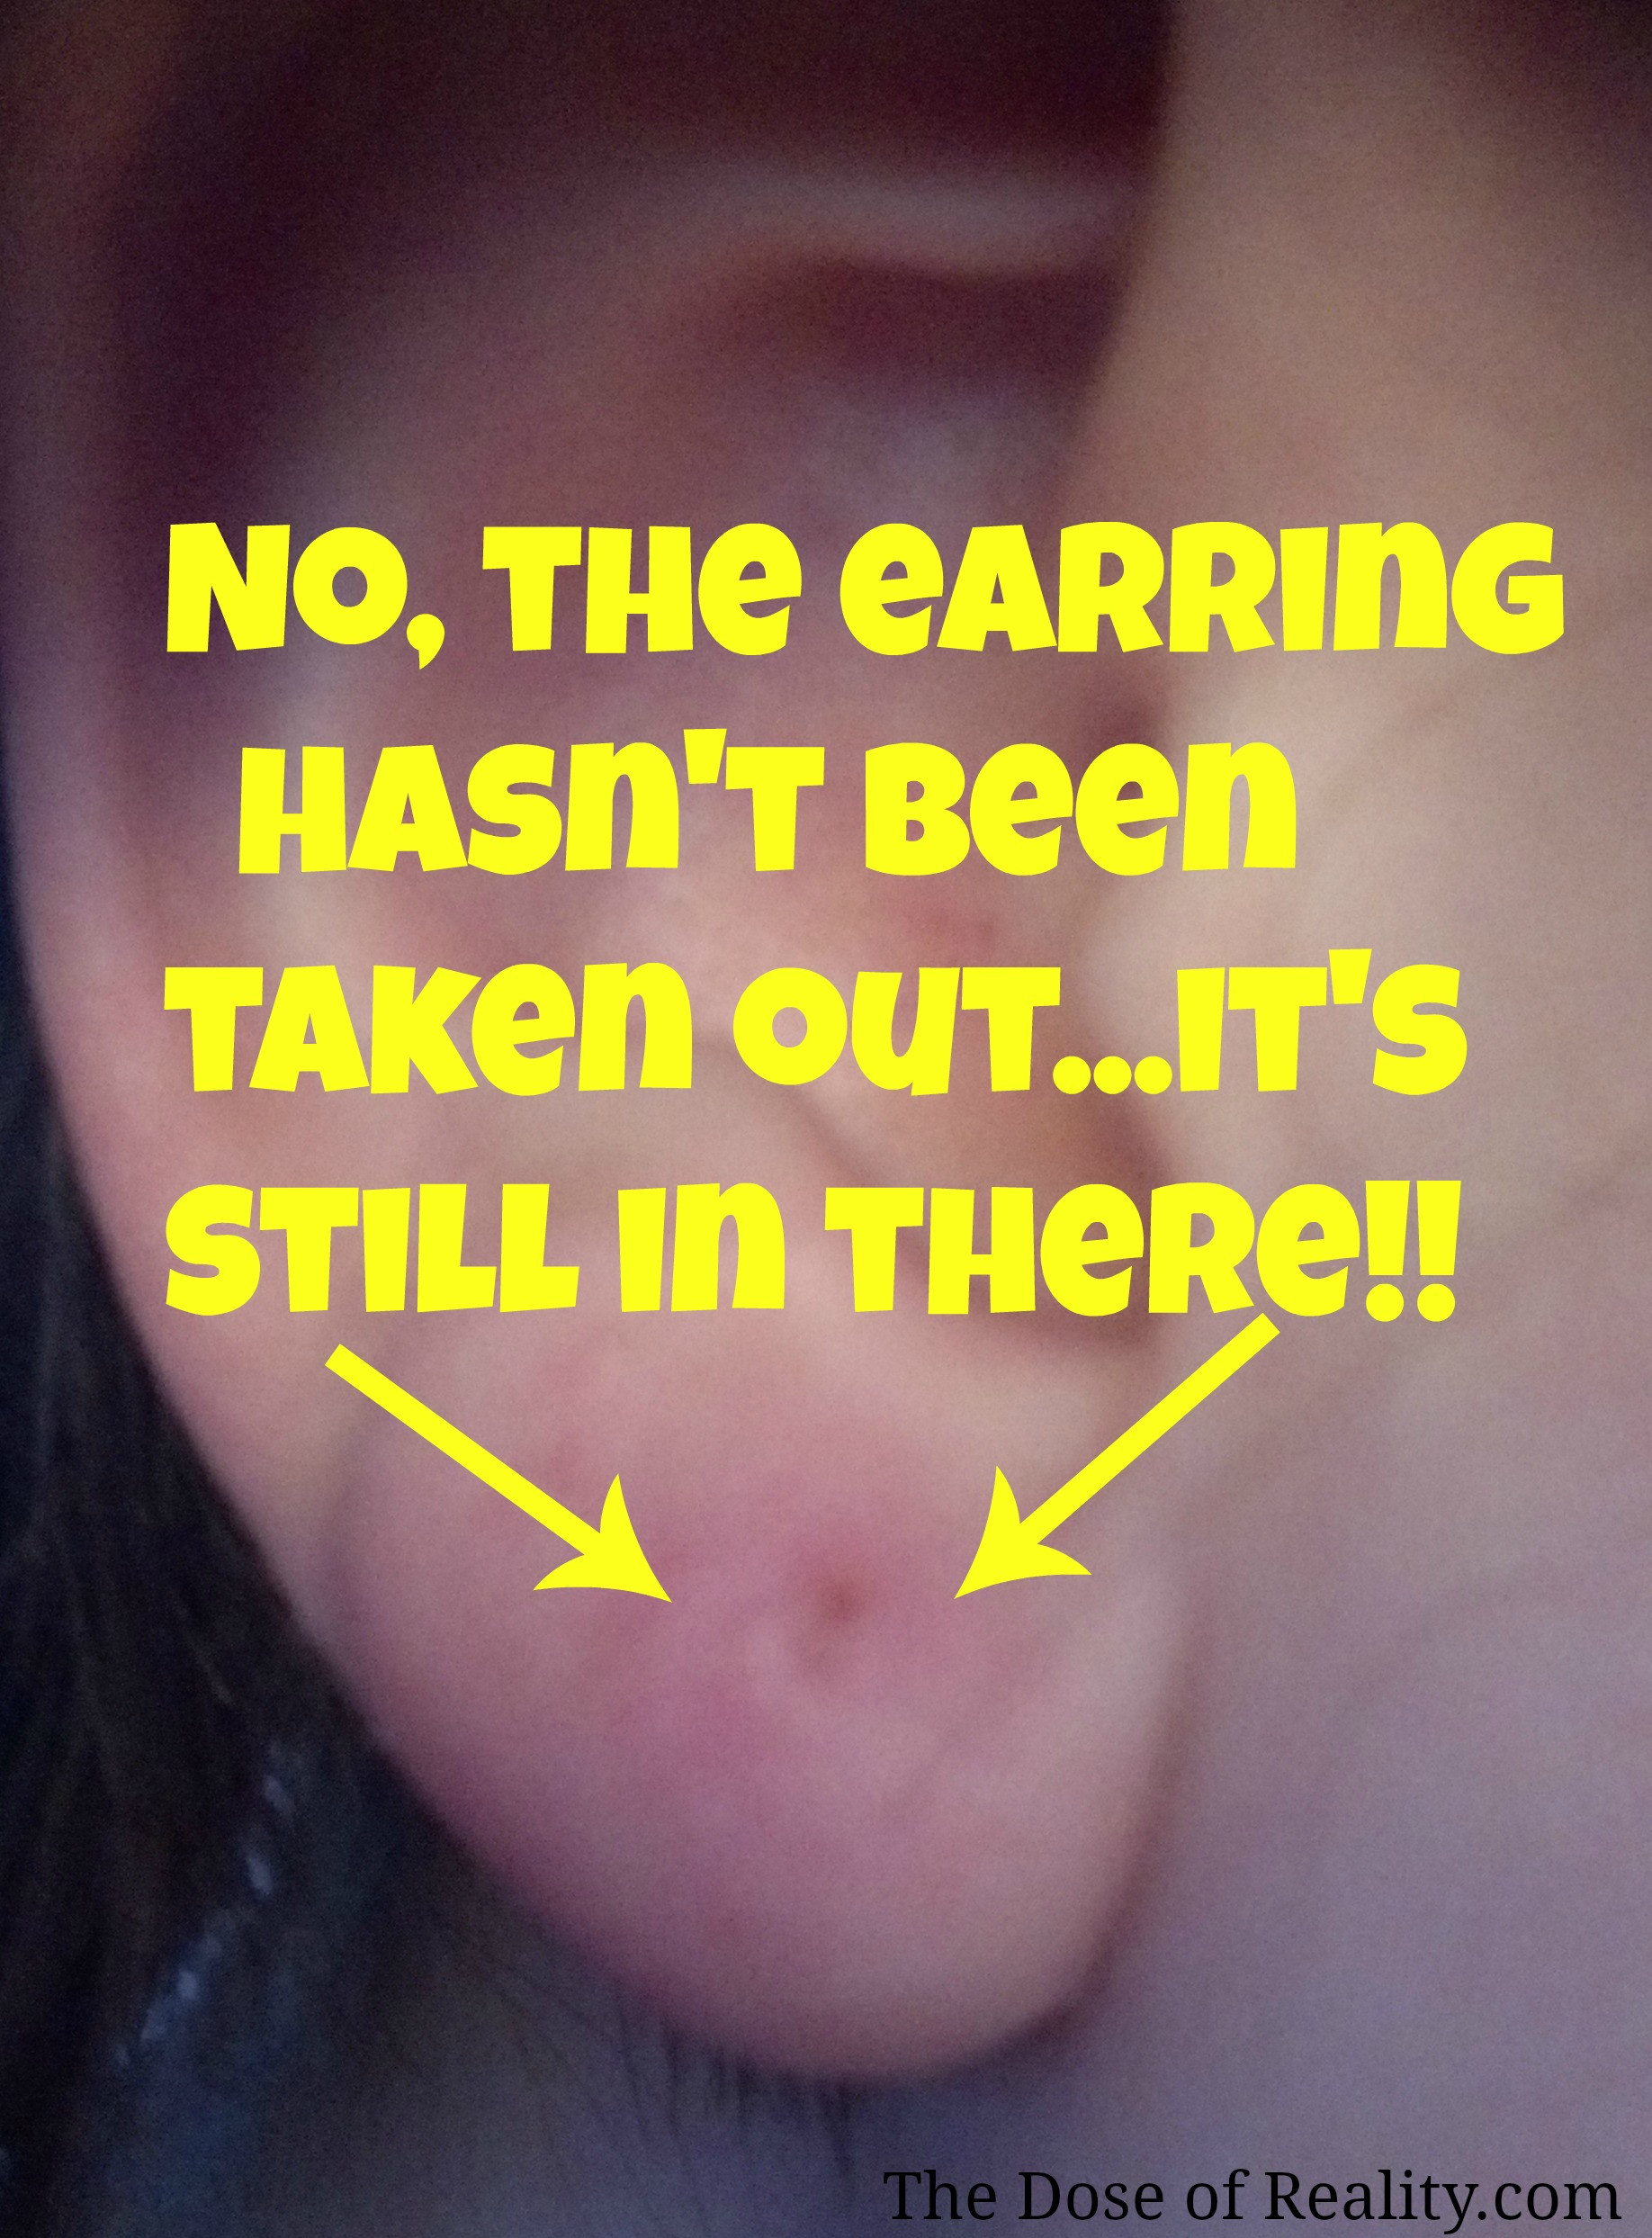 Earring Back Stuck In Earlobe
 Get Laughed Out The Emergency Room